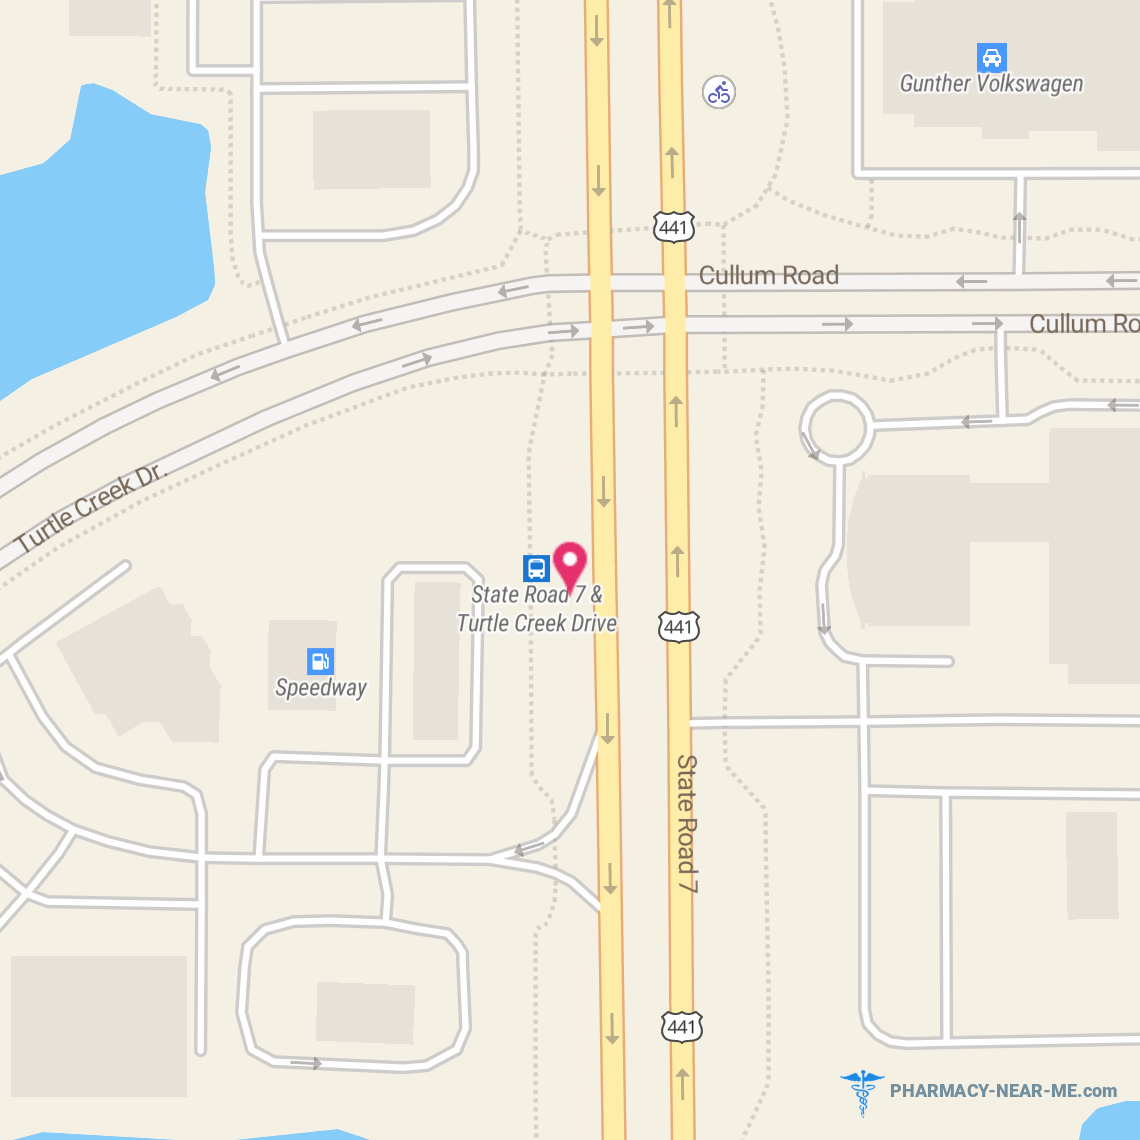 CVS PHARMACY 03652 - Pharmacy Hours, Phone, Reviews & Information: 7621 North State Road 7, Parkland, Florida 33073, United States